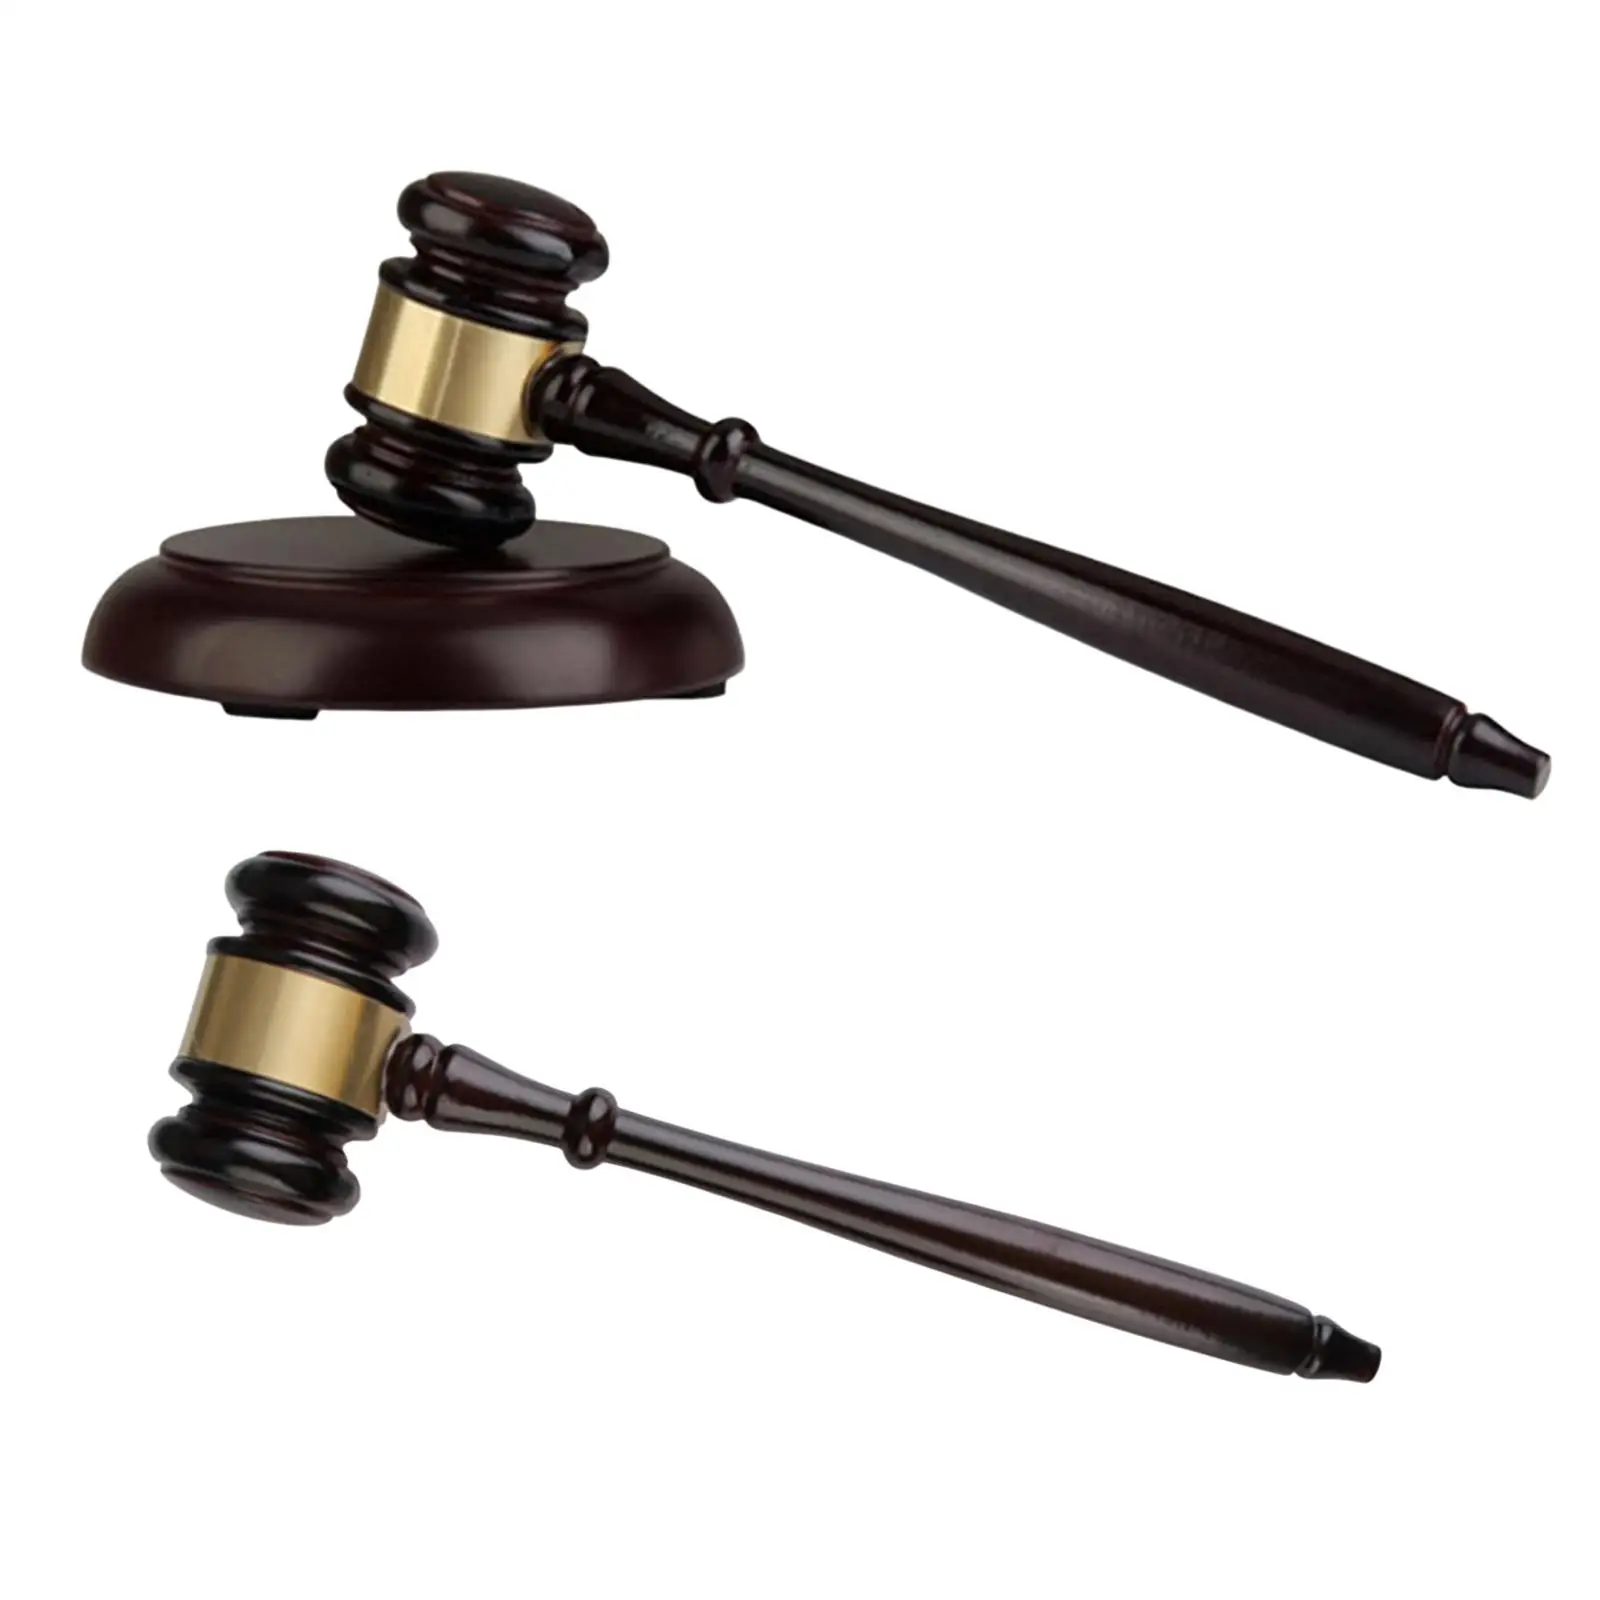 Handmade Mini Mallet Unique Craft Gifts Toys Costume Accessory Cosplay Props Wood Gavel Toy for Judge Justice Auction Lawyer